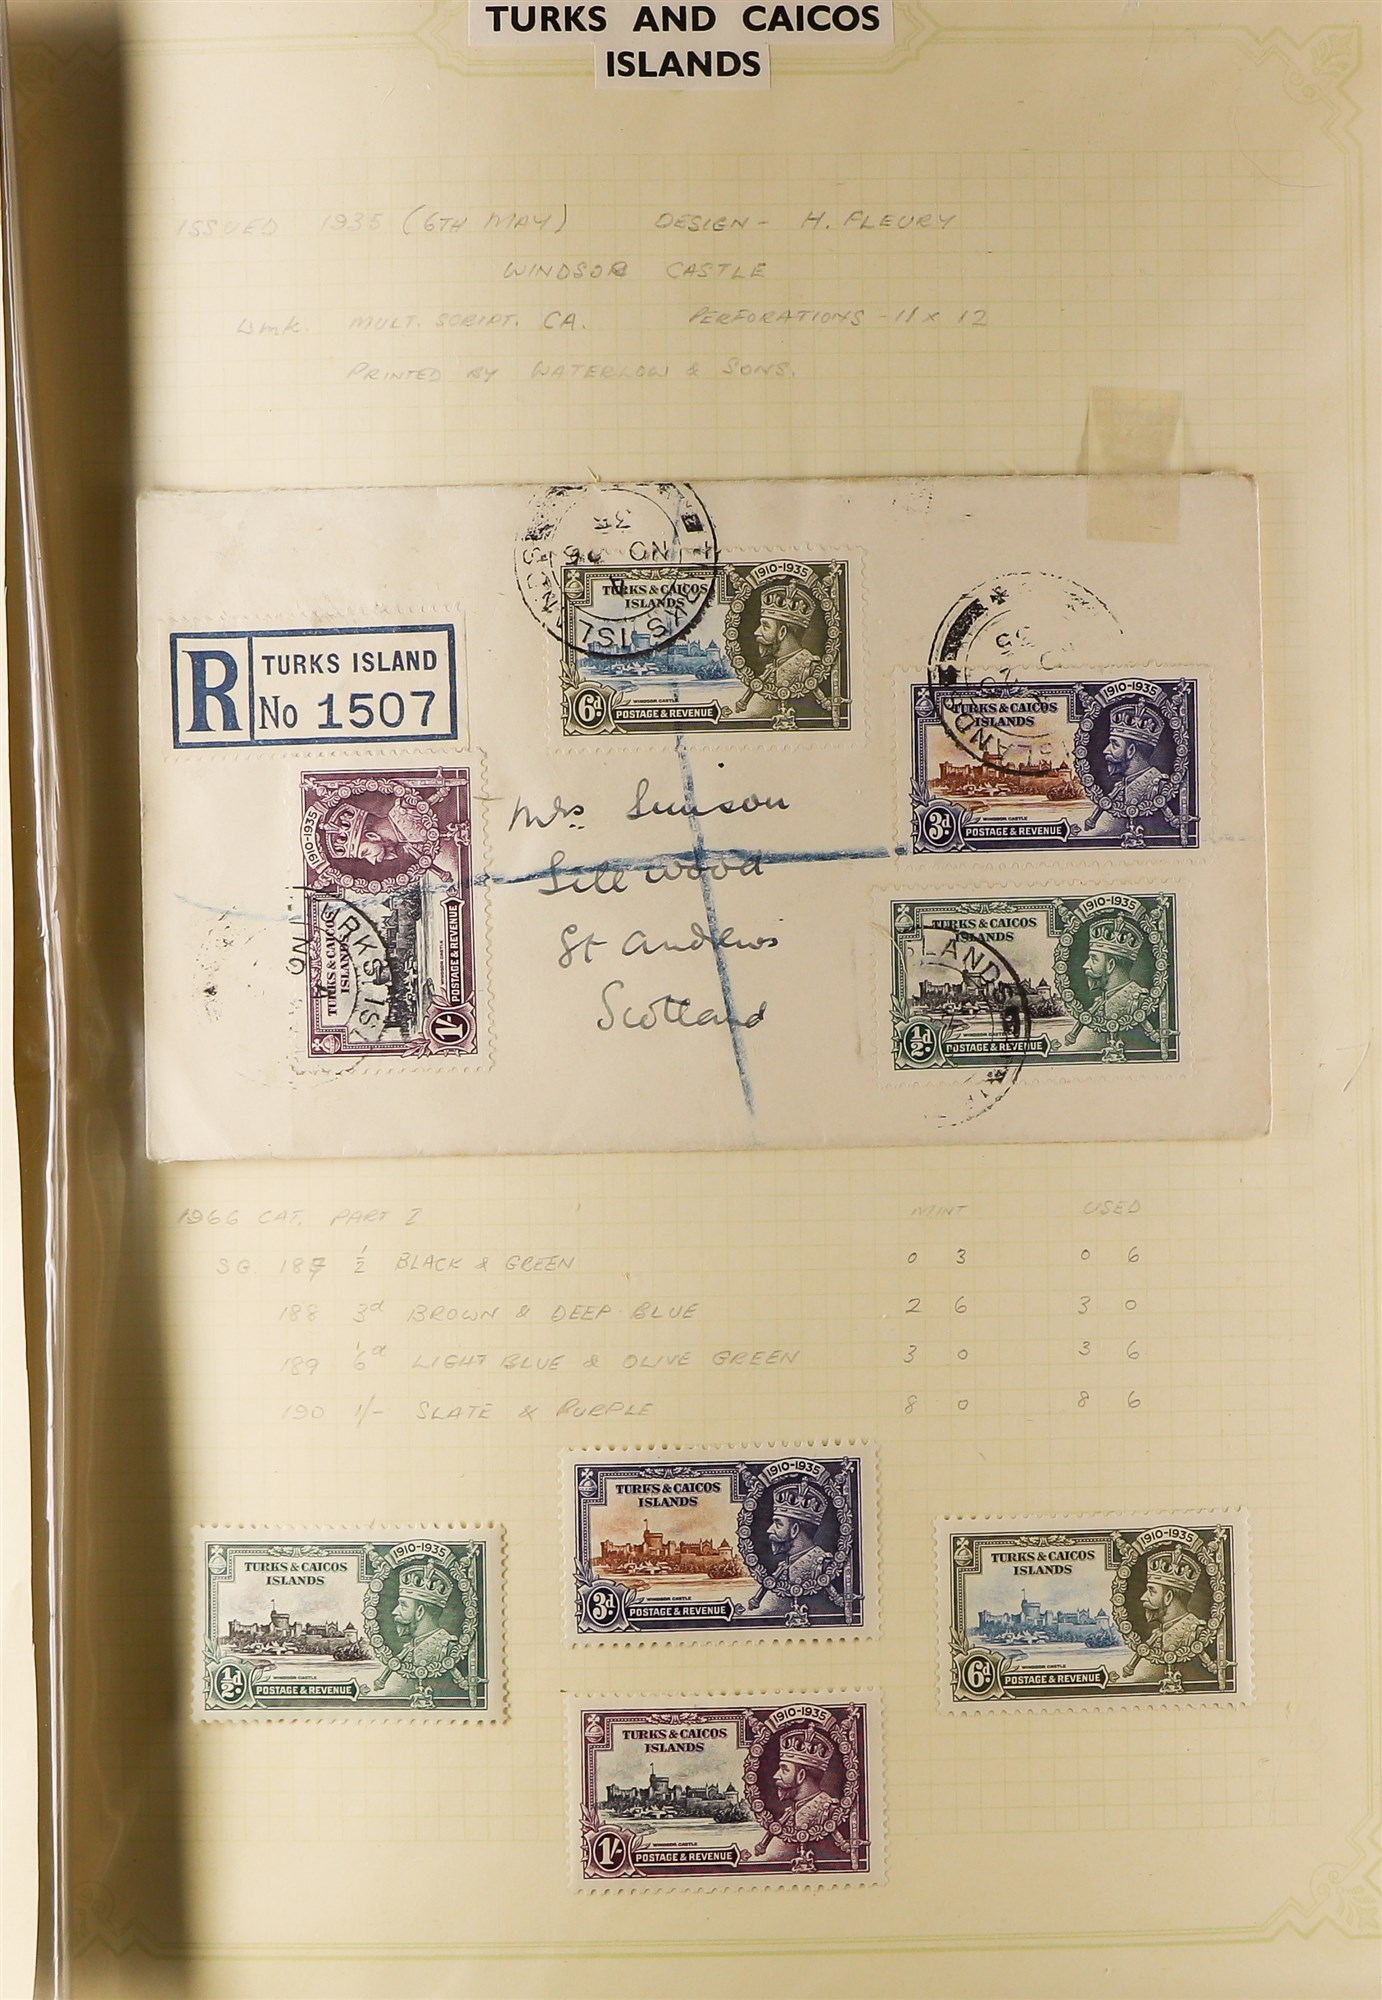 COLLECTIONS & ACCUMULATIONS 500+ STAMP ALBUMS. VAST ORIGINAL WORLD-WIDE ESTATE. From ledgers to ' - Image 30 of 55